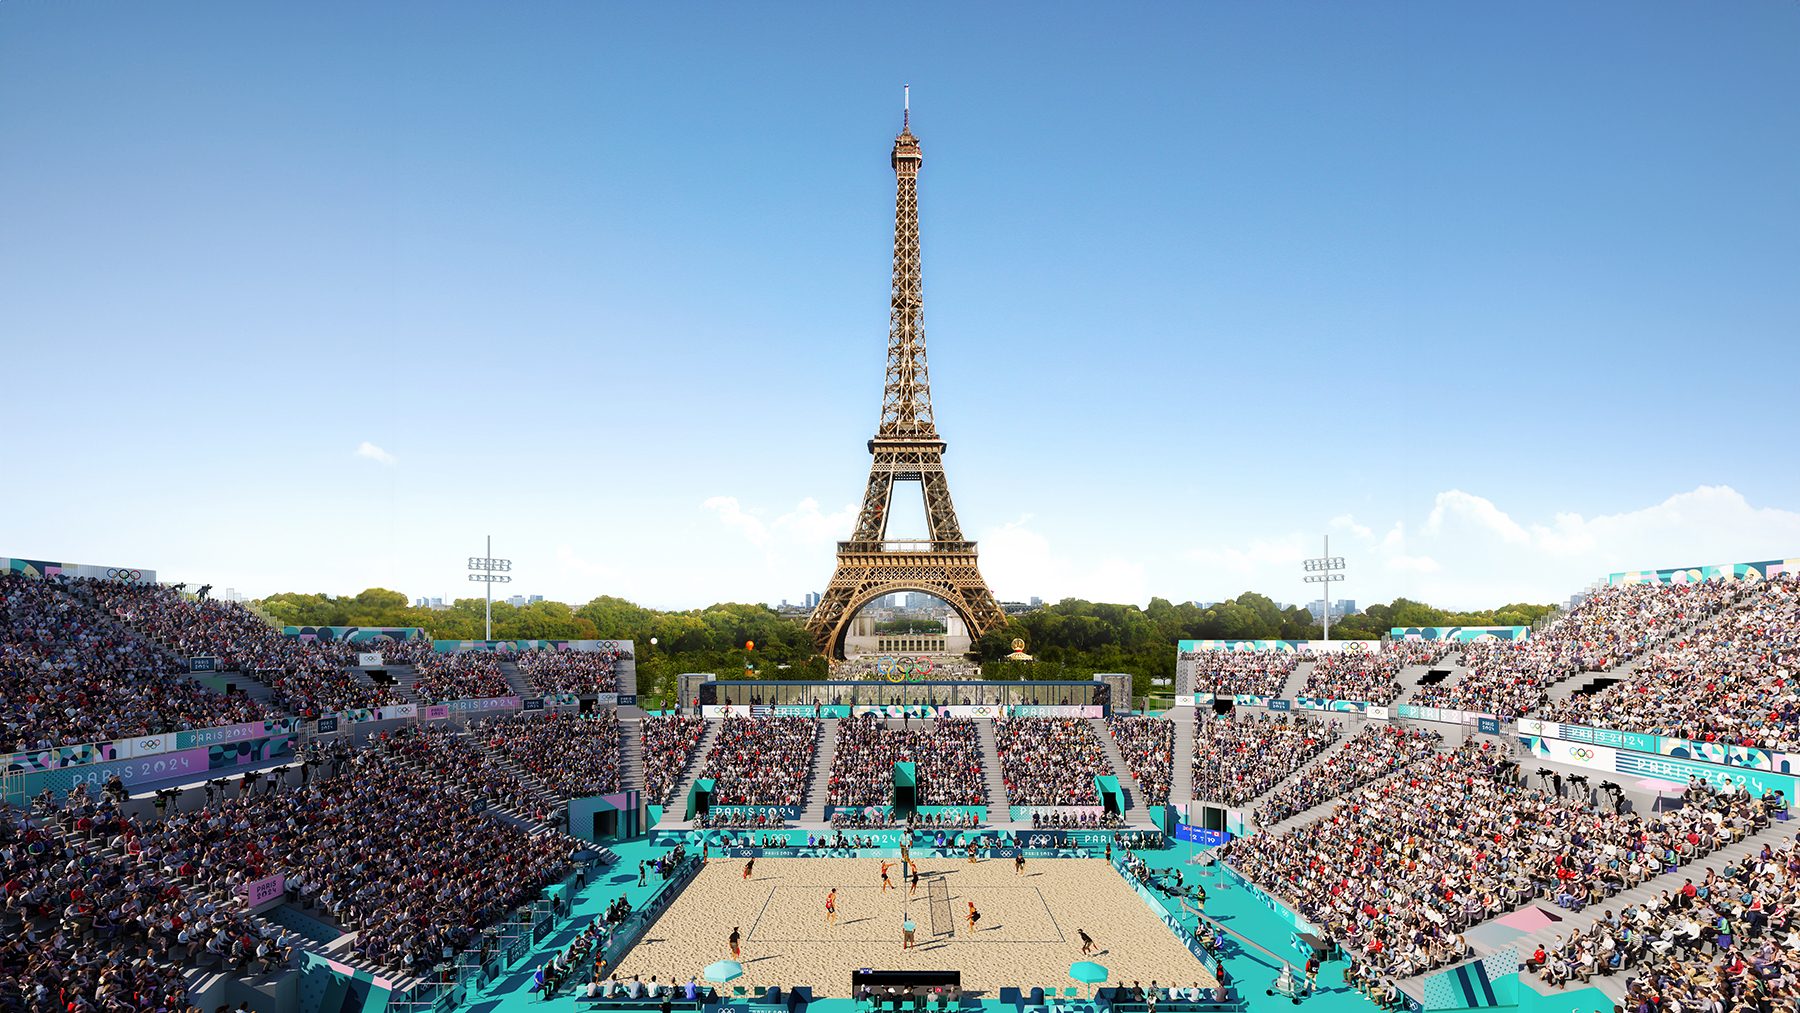 A computer-generated image of a beach volleyball arena sitting in front of the Eiffel Tower.